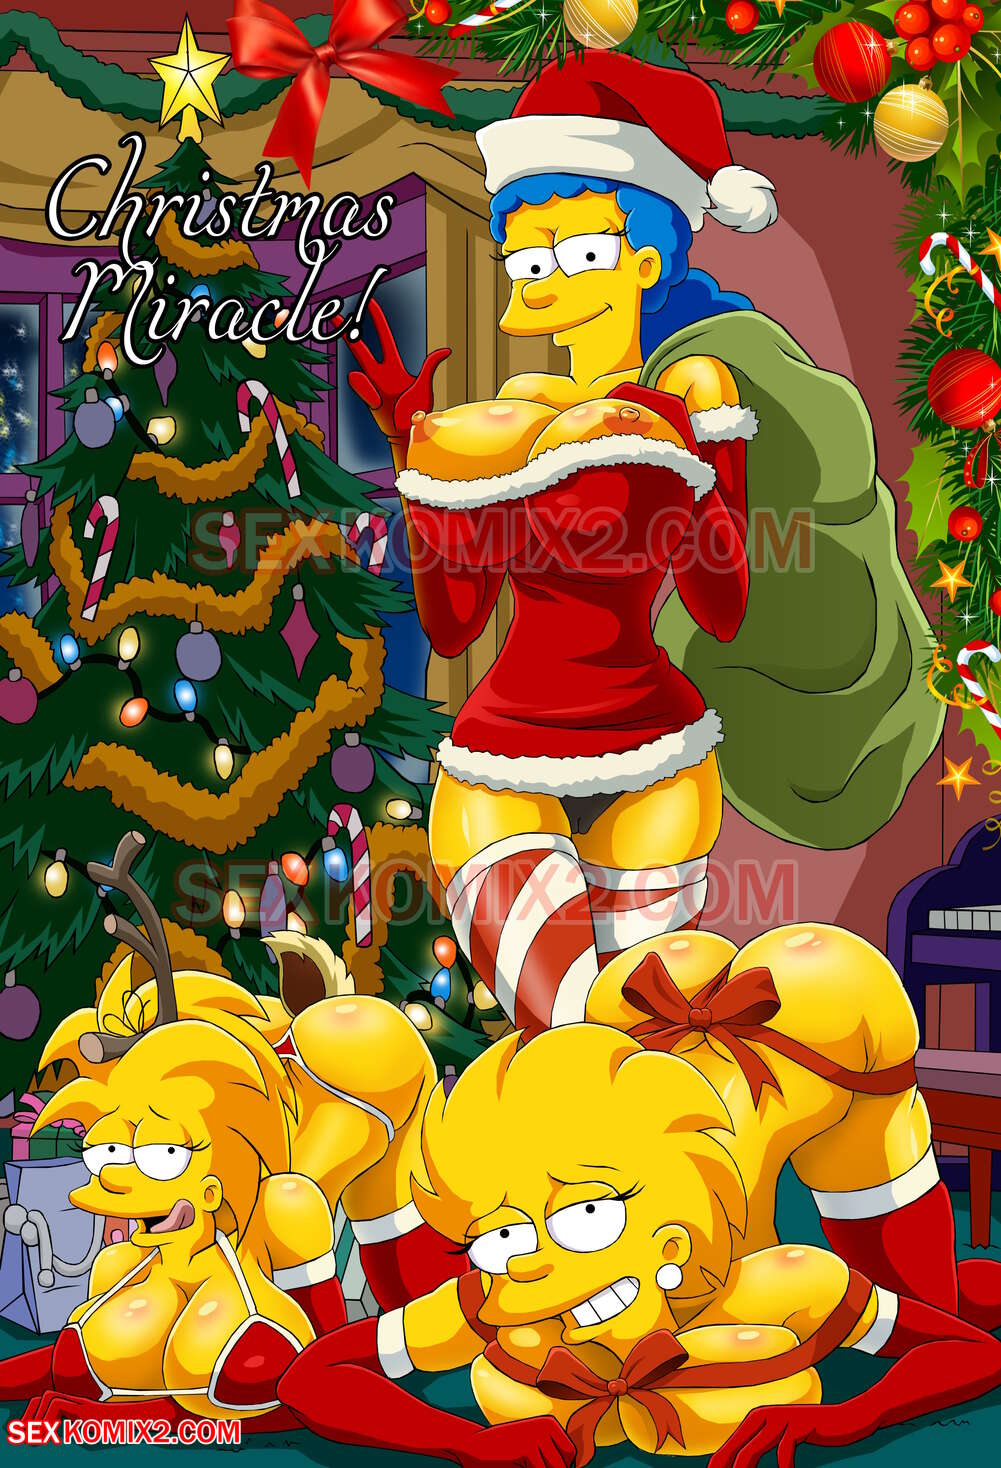 😈 Porn comic The Simpsons. Christmas Miracle. by sexkomix2.com ...